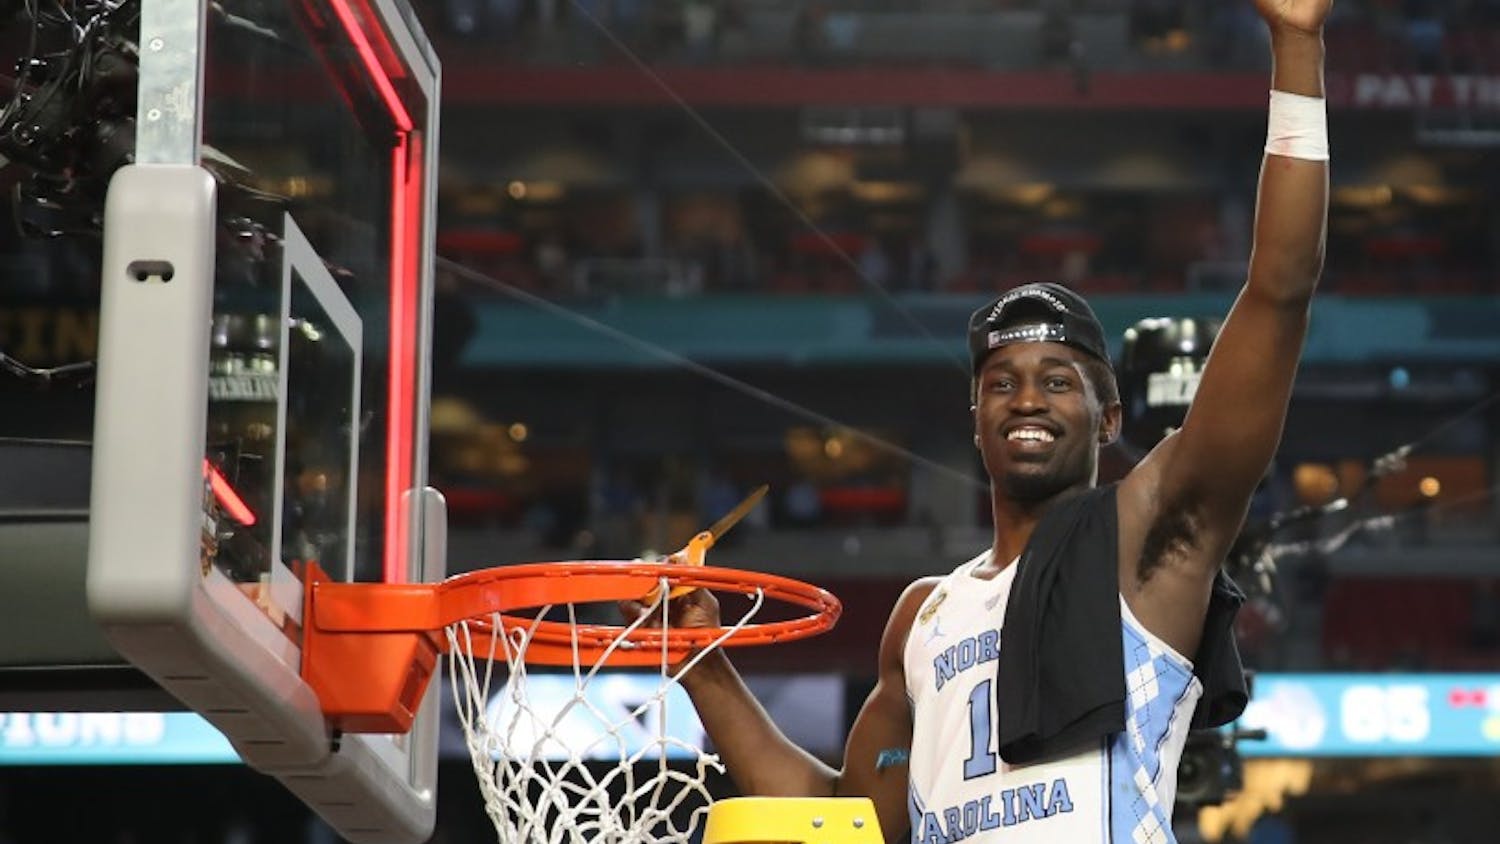 North Carolina wing Theo Pinson (1) holds up his part of the cut down net after defeating Gonzaga 71-65 in the NCAA men's basketball Championship Monday night in Phoenix.